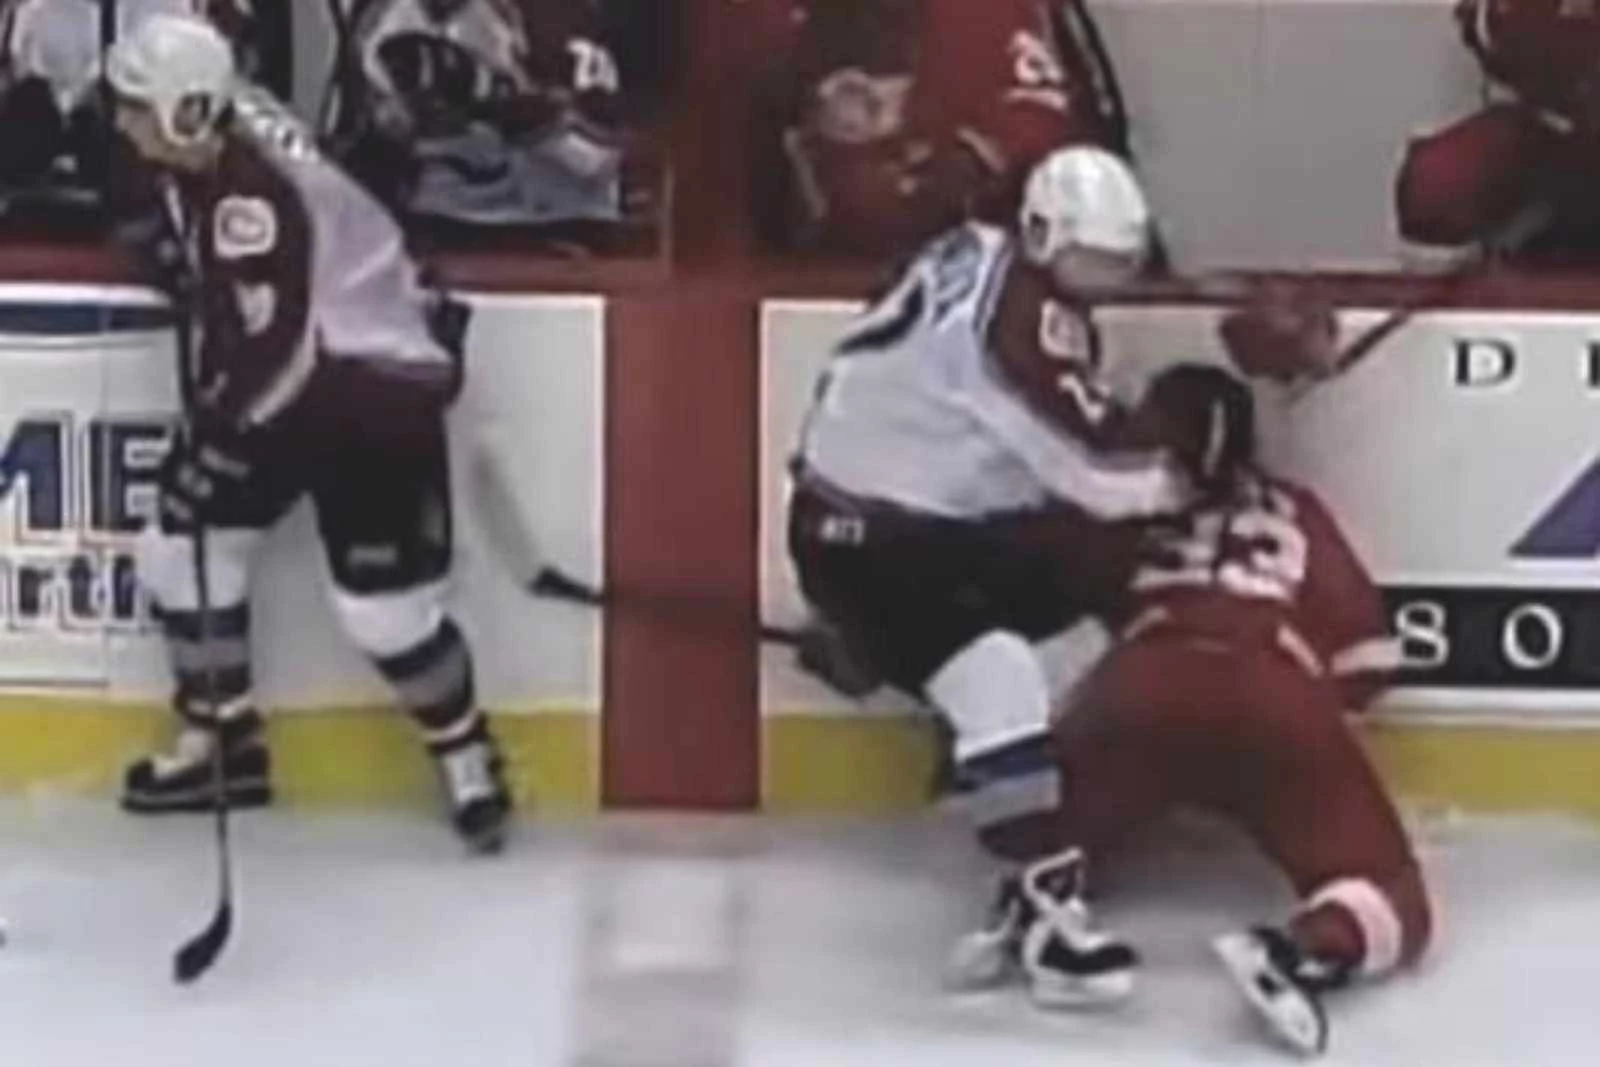 ESPN Documentary About the Avs and Red Wings Brawl in '97 Coming